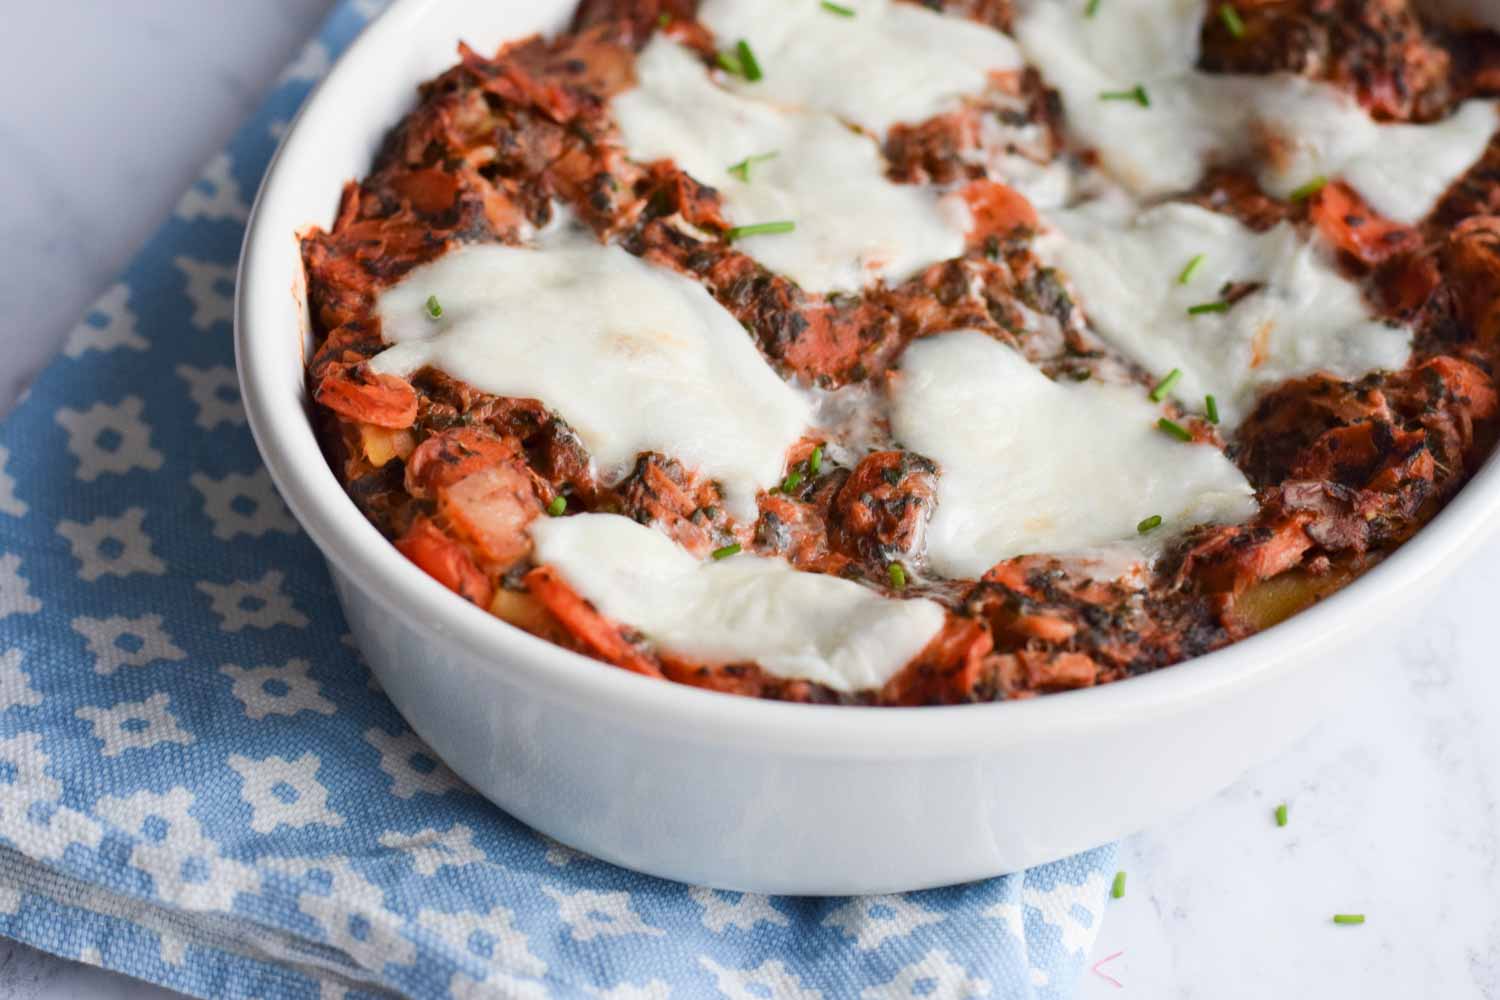 low FODMAP tuna lasagna in an oven dish with mozzarella on top